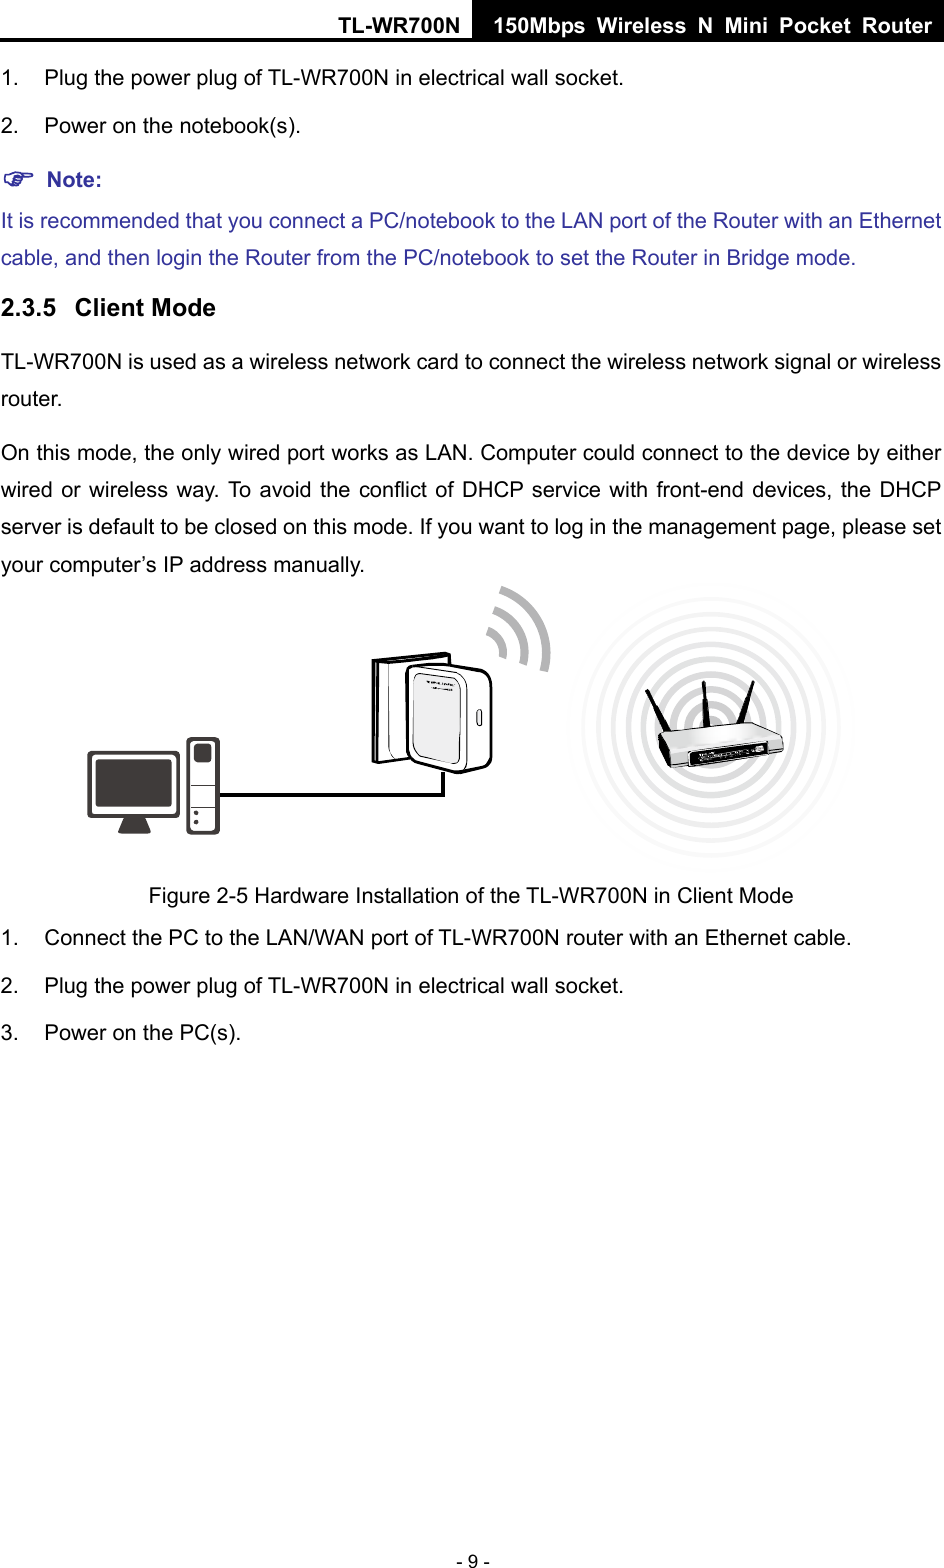 TL-WR700N 150Mbps Wireless N Mini Pocket Router - 9 - 1.  Plug the power plug of TL-WR700N in electrical wall socket. 2.  Power on the notebook(s). ) Note: It is recommended that you connect a PC/notebook to the LAN port of the Router with an Ethernet cable, and then login the Router from the PC/notebook to set the Router in Bridge mode.   2.3.5  Client Mode TL-WR700N is used as a wireless network card to connect the wireless network signal or wireless router. On this mode, the only wired port works as LAN. Computer could connect to the device by either wired or wireless way. To avoid the conflict of DHCP service with front-end devices, the DHCP server is default to be closed on this mode. If you want to log in the management page, please set your computer’s IP address manually.  Figure 2-5 Hardware Installation of the TL-WR700N in Client Mode 1.  Connect the PC to the LAN/WAN port of TL-WR700N router with an Ethernet cable. 2.  Plug the power plug of TL-WR700N in electrical wall socket. 3.  Power on the PC(s). 